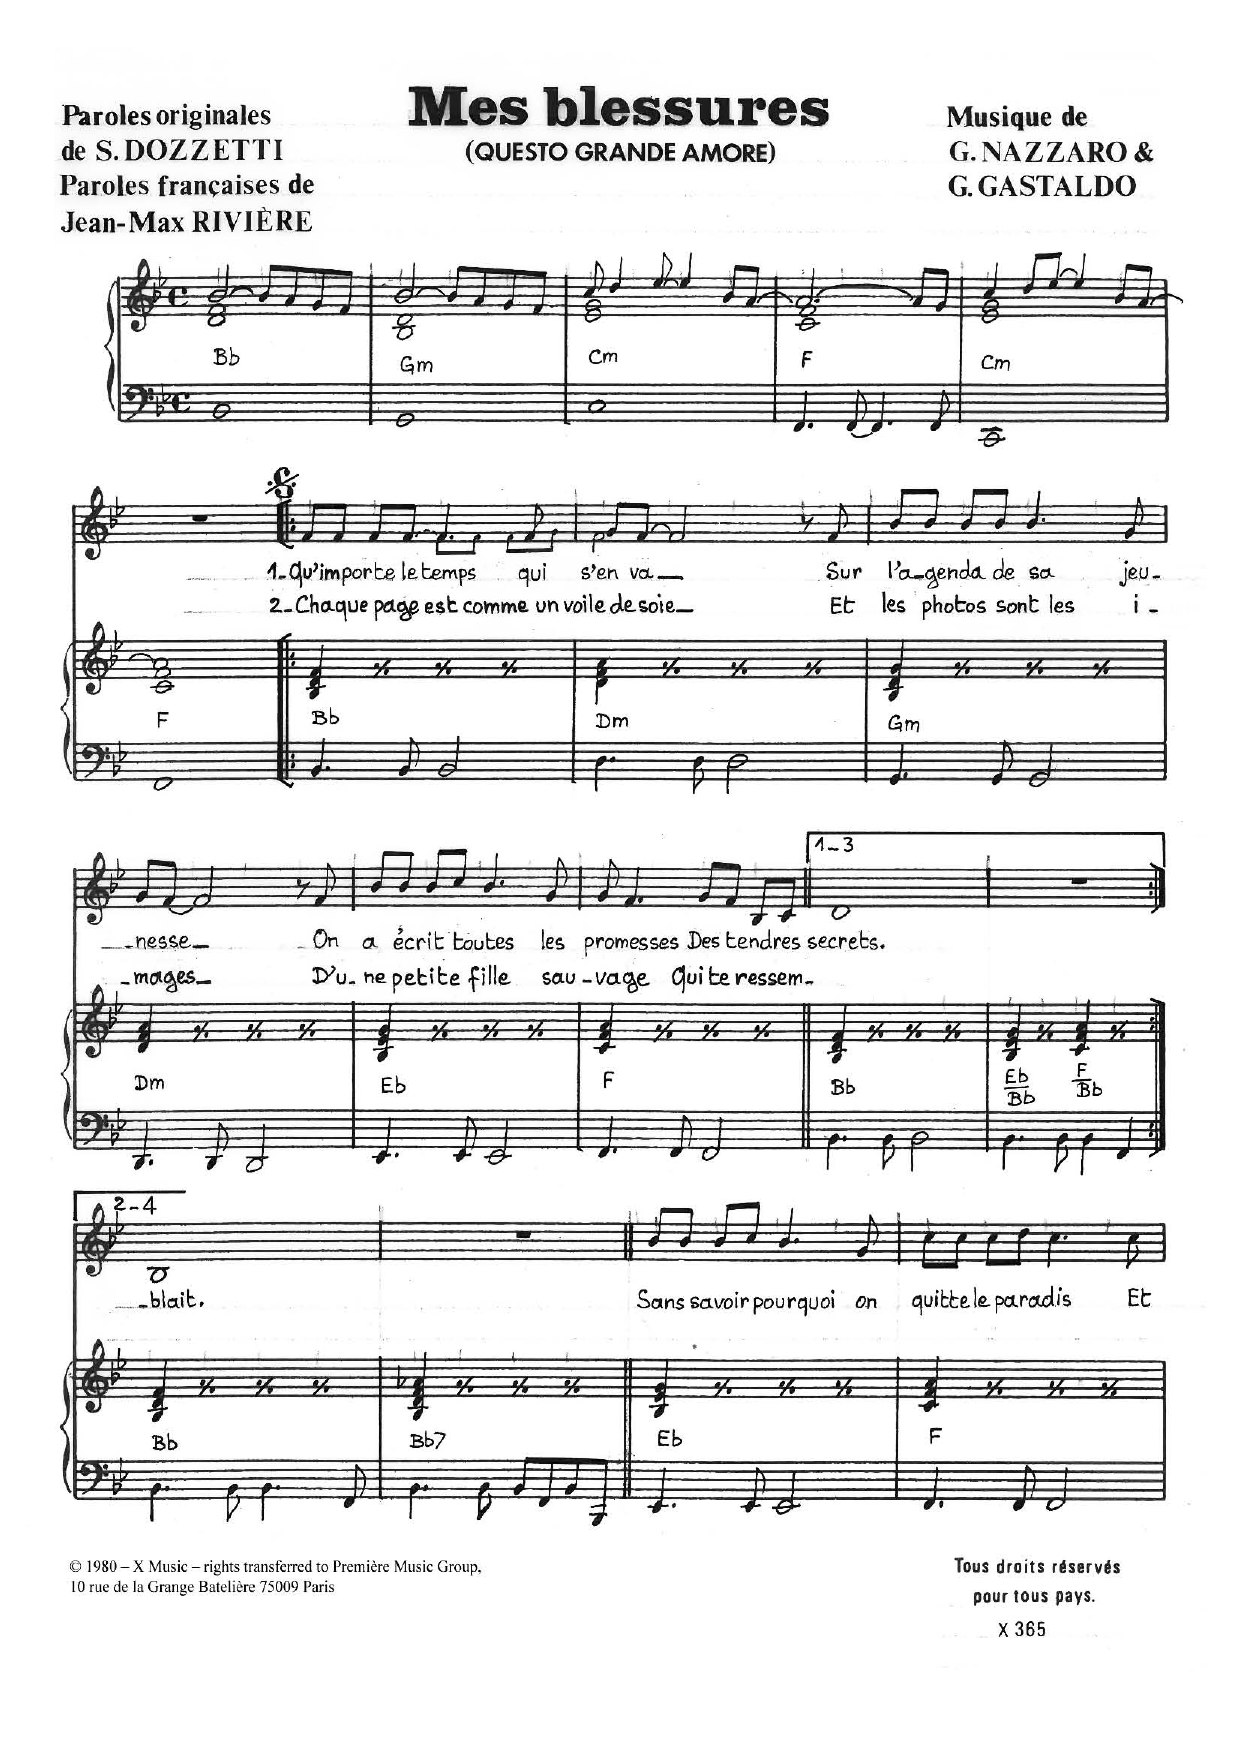 Download Gianni Nazzaro Mes Blessures (Questo Grande Amore) Sheet Music